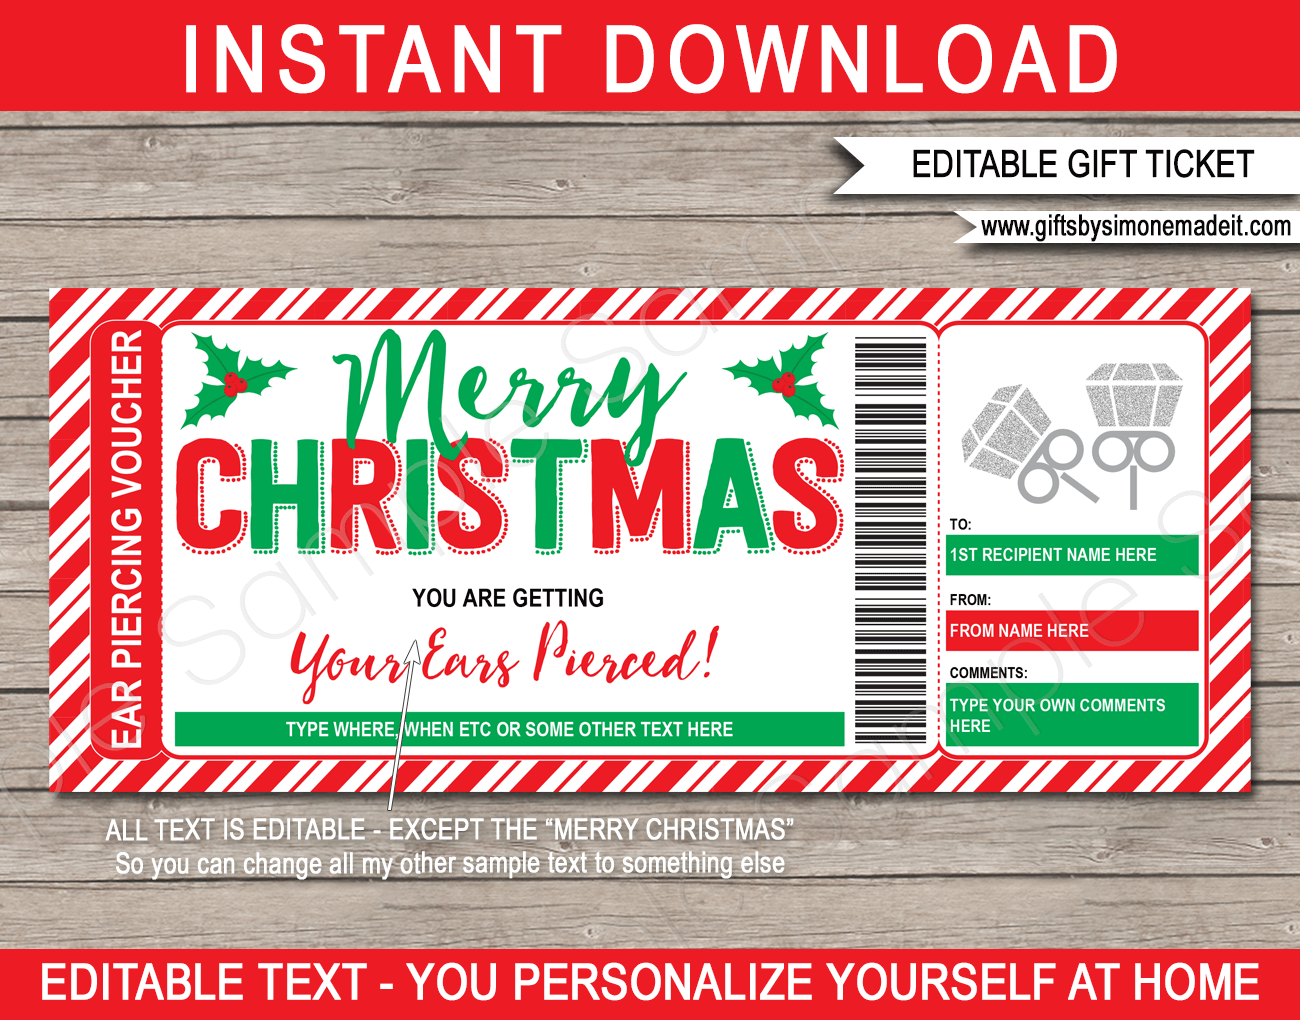 Christmas Ear Piercing Gift Voucher Template | Gift Idea for Teen Daughter | Printable Ticket | DIY Gift Certificate with Editable Text | INSTANT DOWNLOAD via giftsbysimonemadeit.com